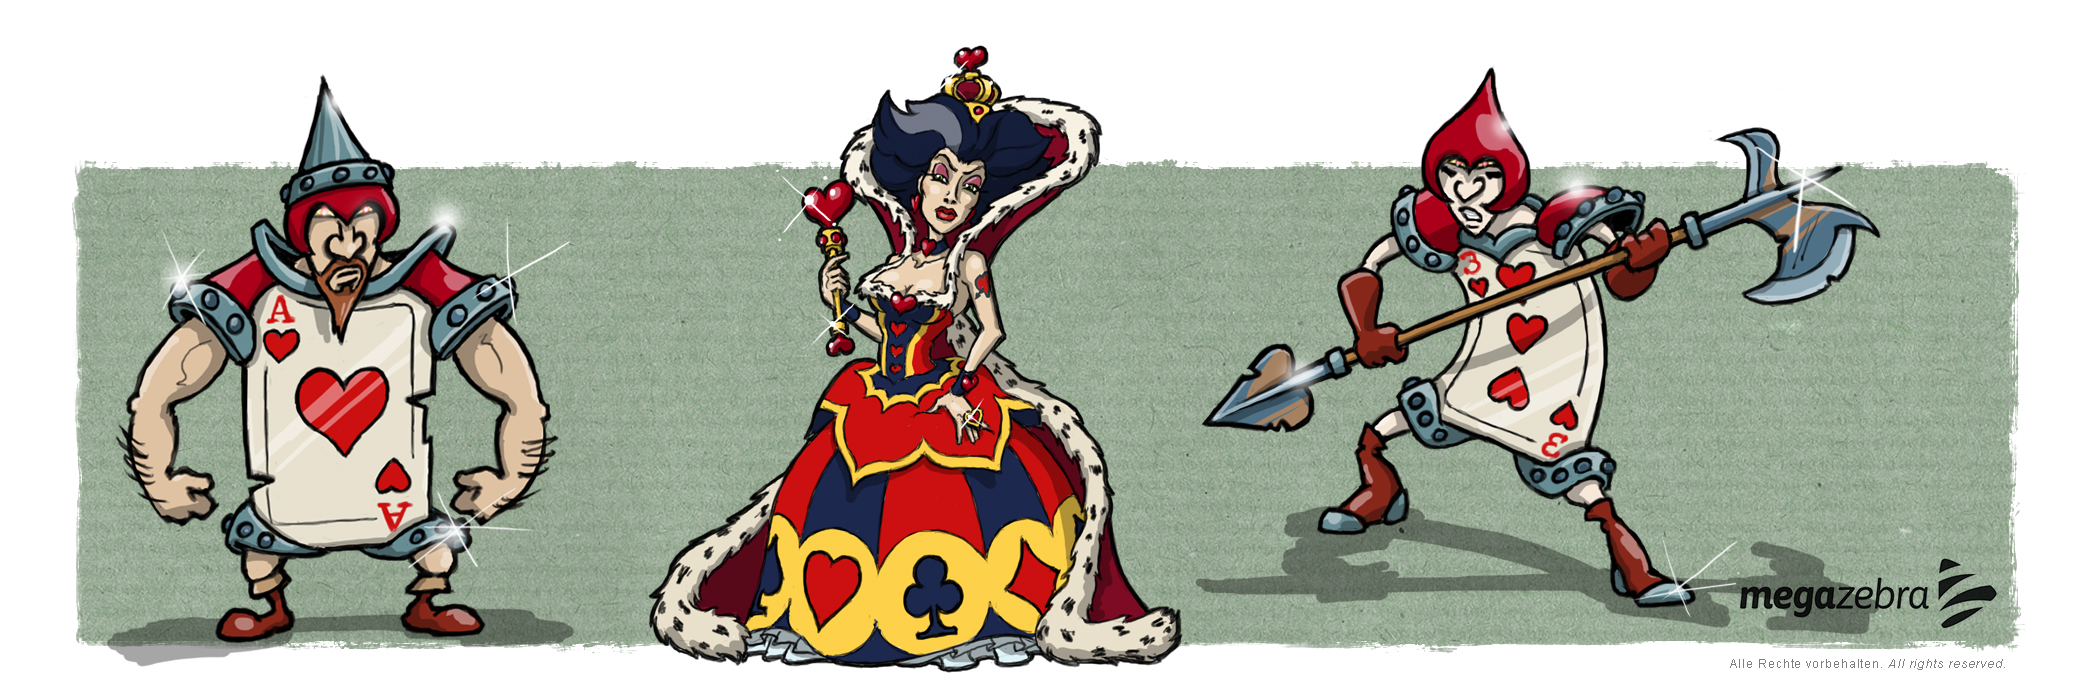 Character Development of Fairy Tale figures for a social browser game